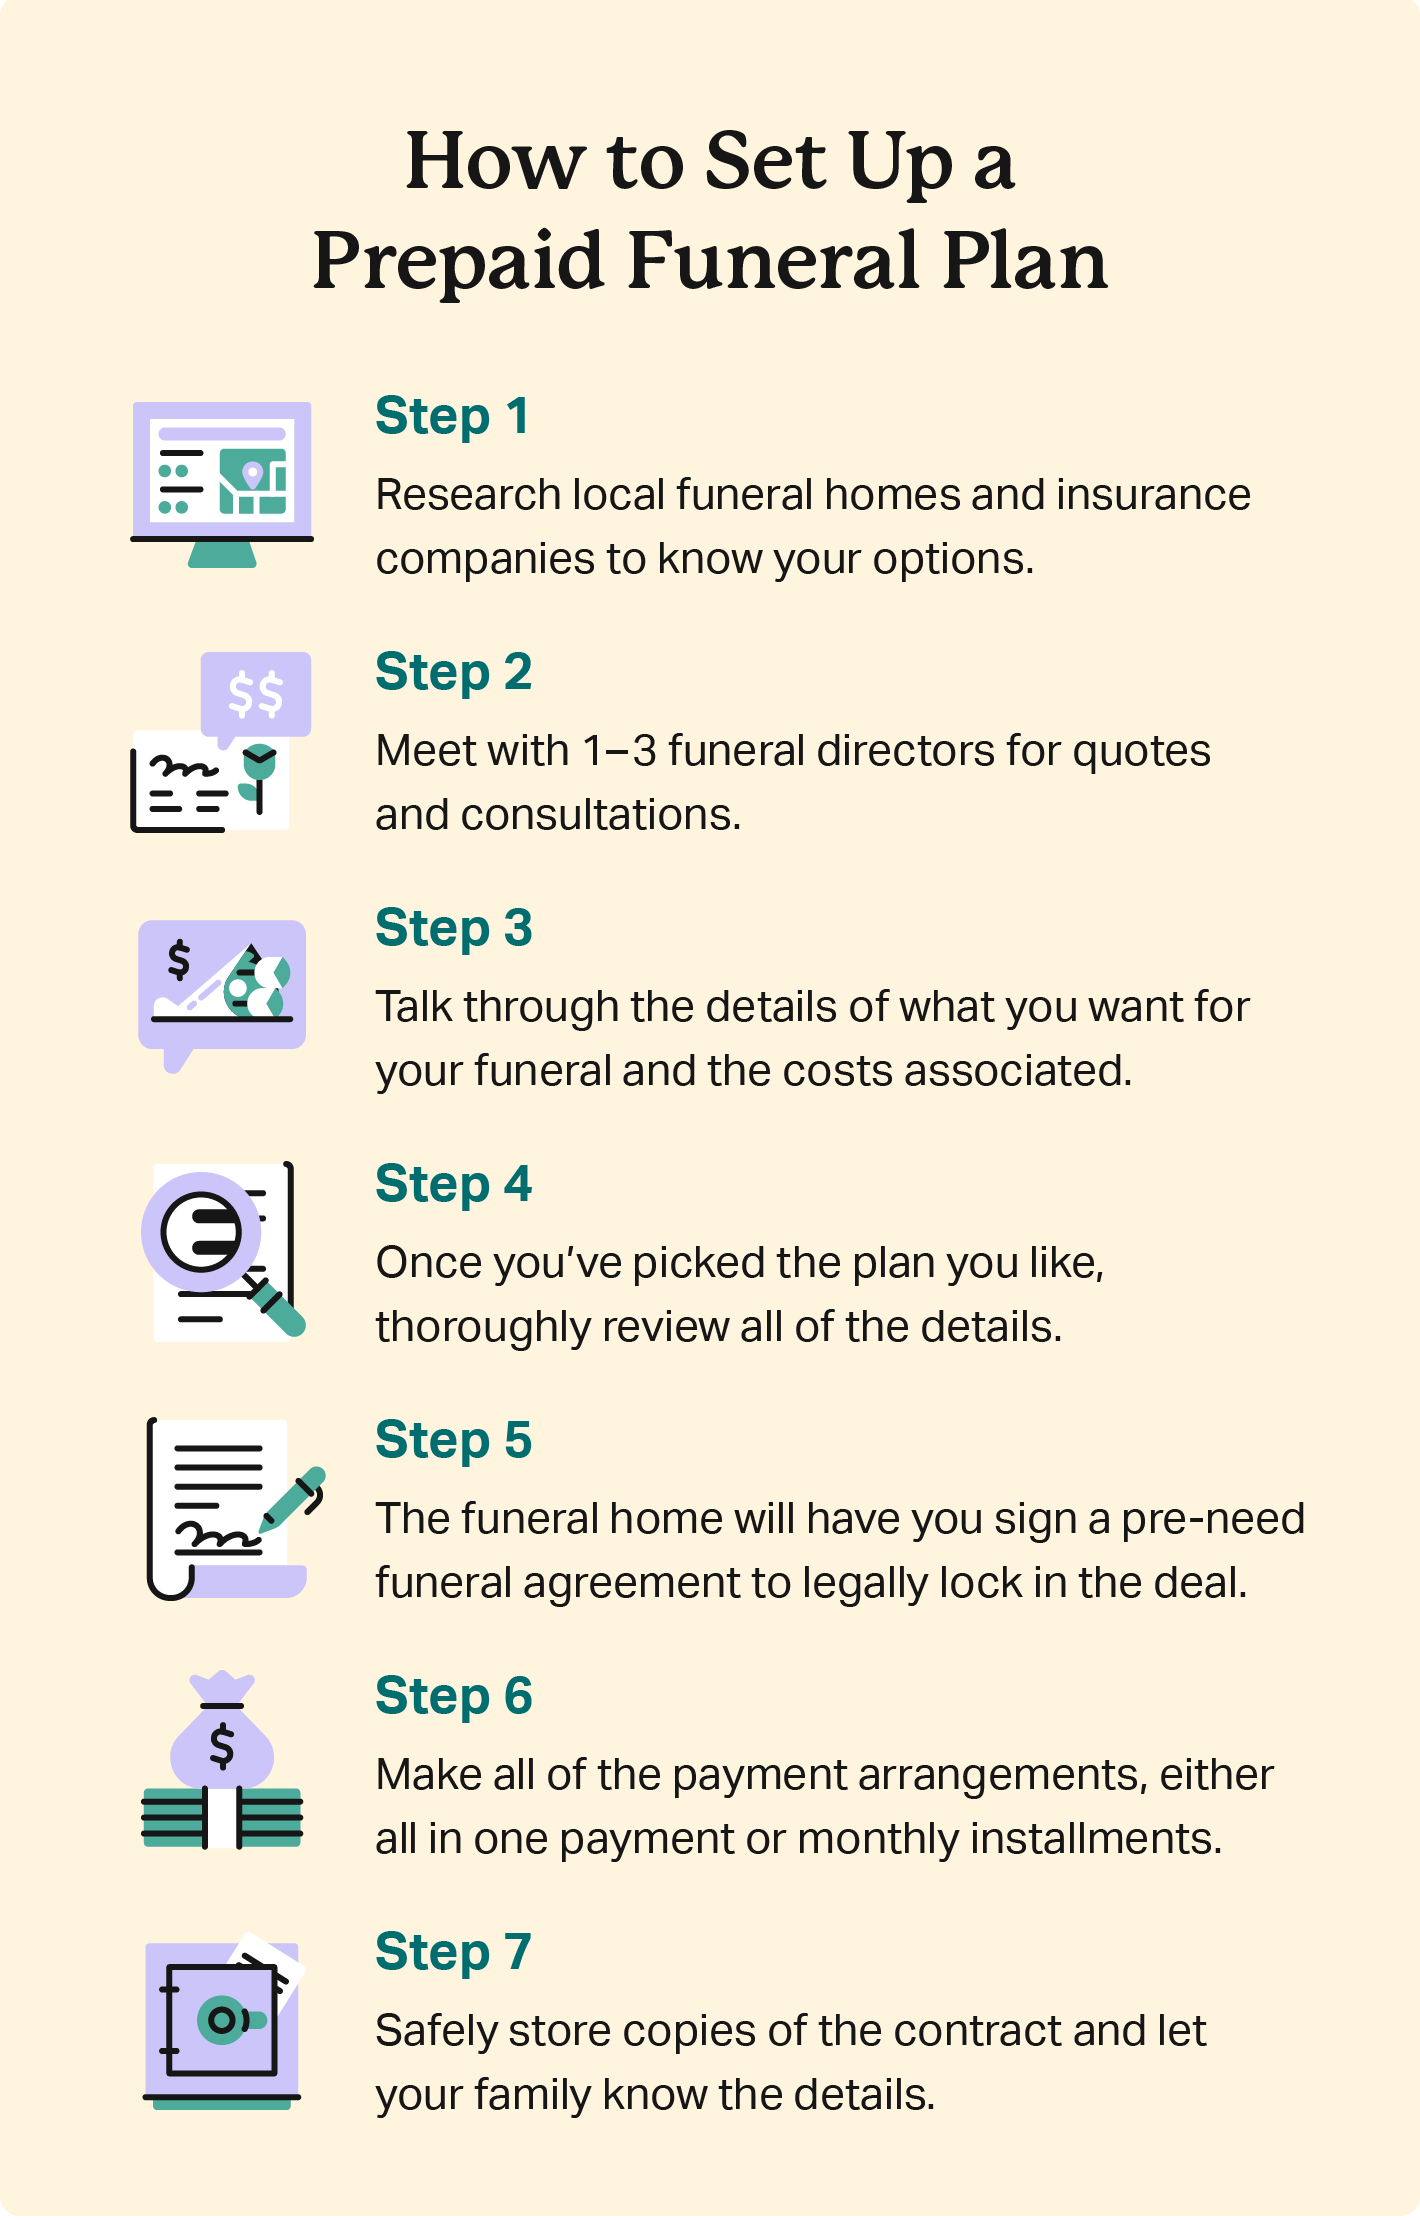 List of 7 steps to setting up a prepaid funeral plan